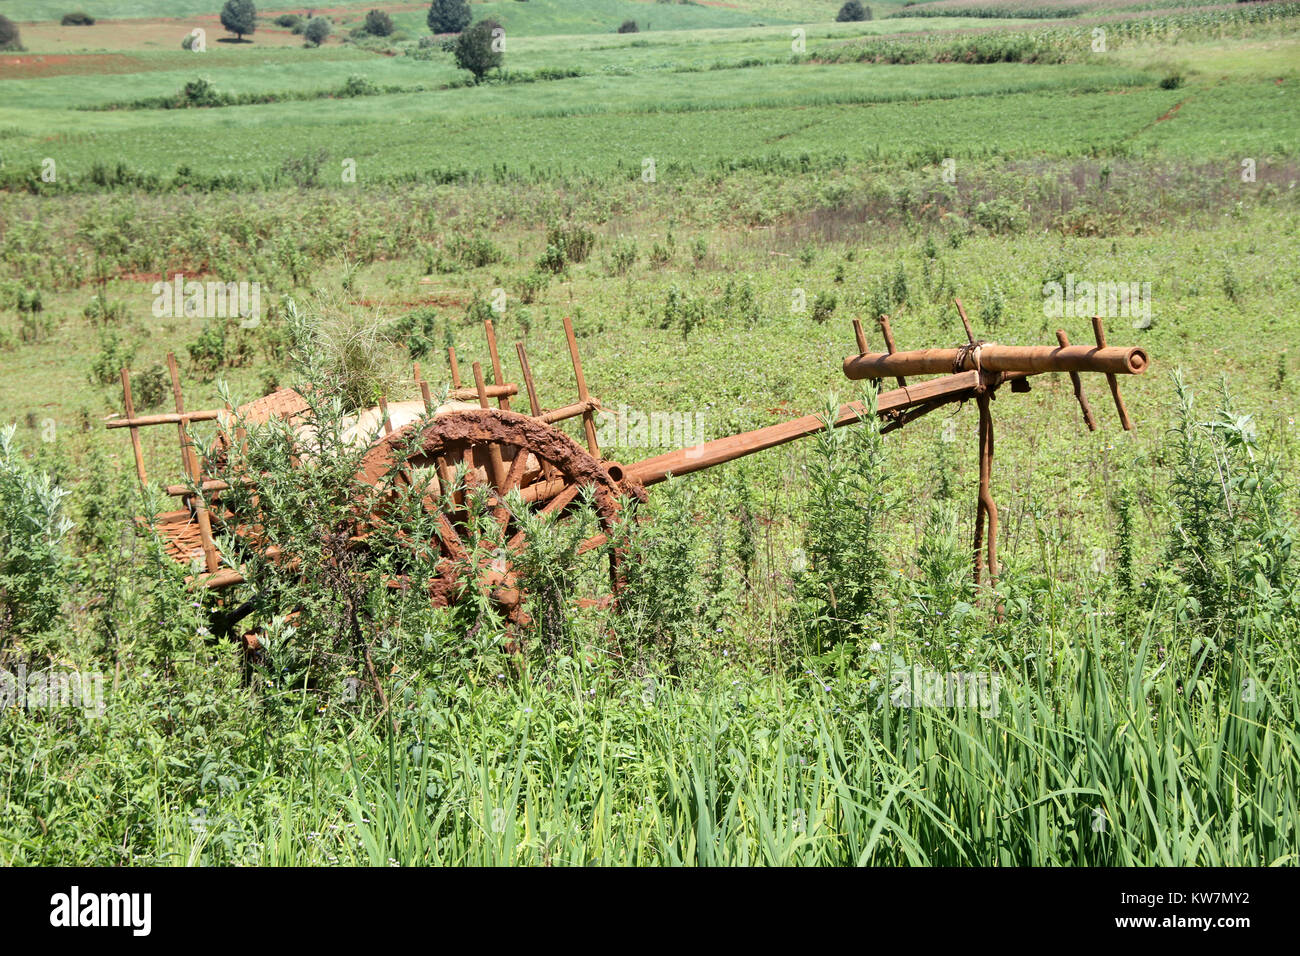 Dirty wooden cart on the green field in Shan state, Myanmar Stock Photo